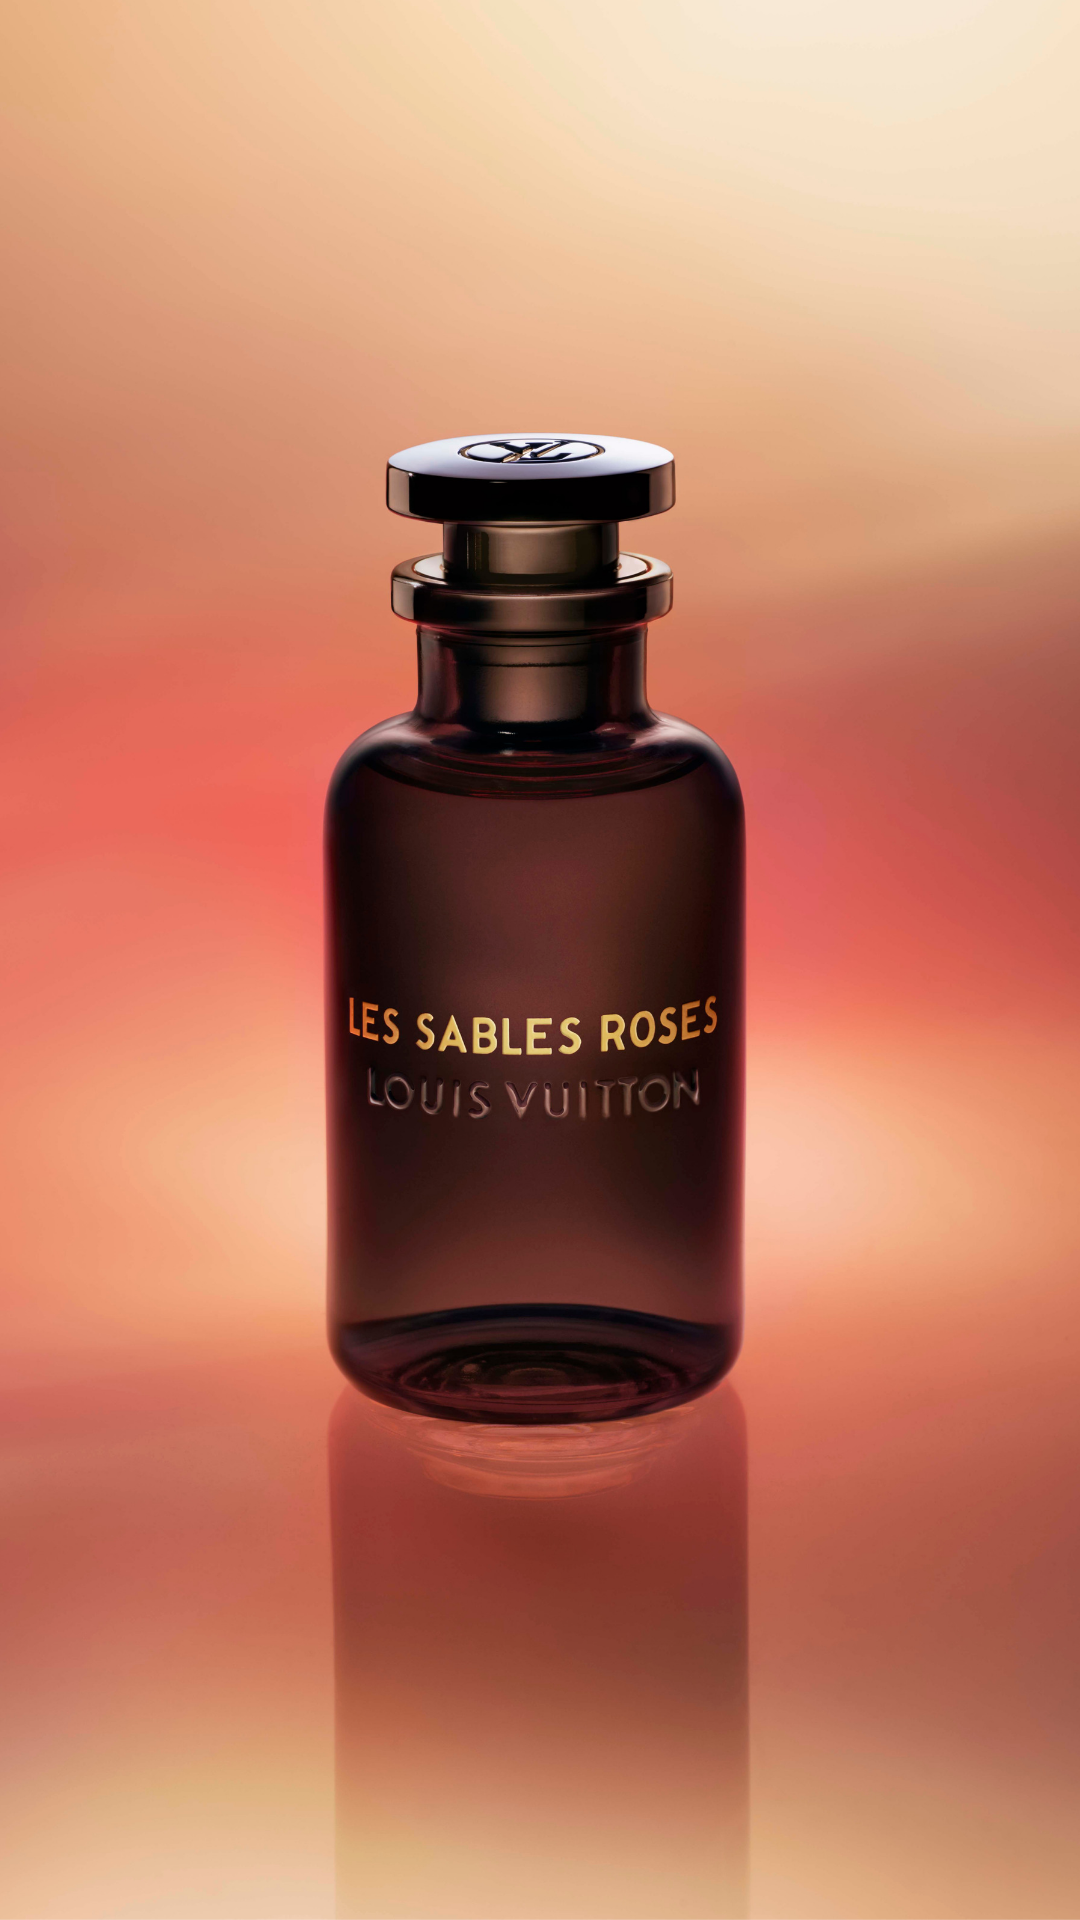 1001 NIGHTS is inspired by Louis Vuitton LES SABLES ROSES #lv